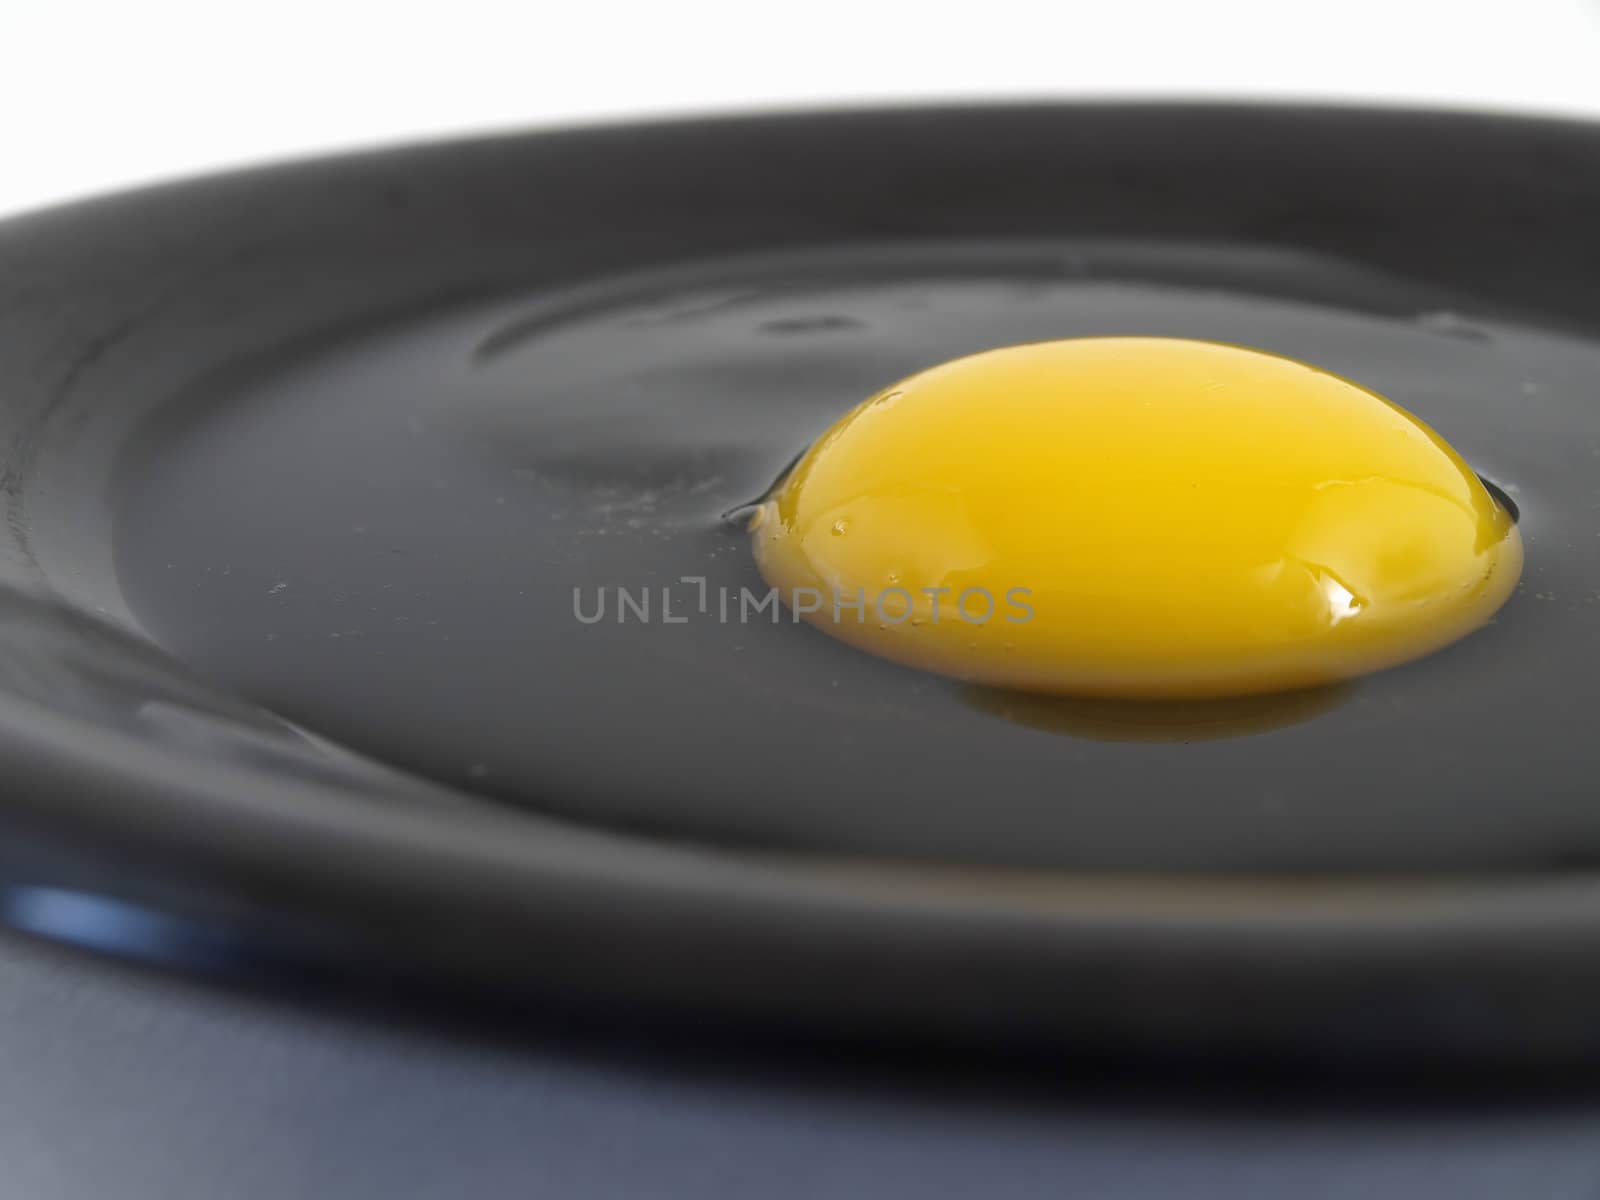 A raw egg cracked on a black plate. Studio isolation.